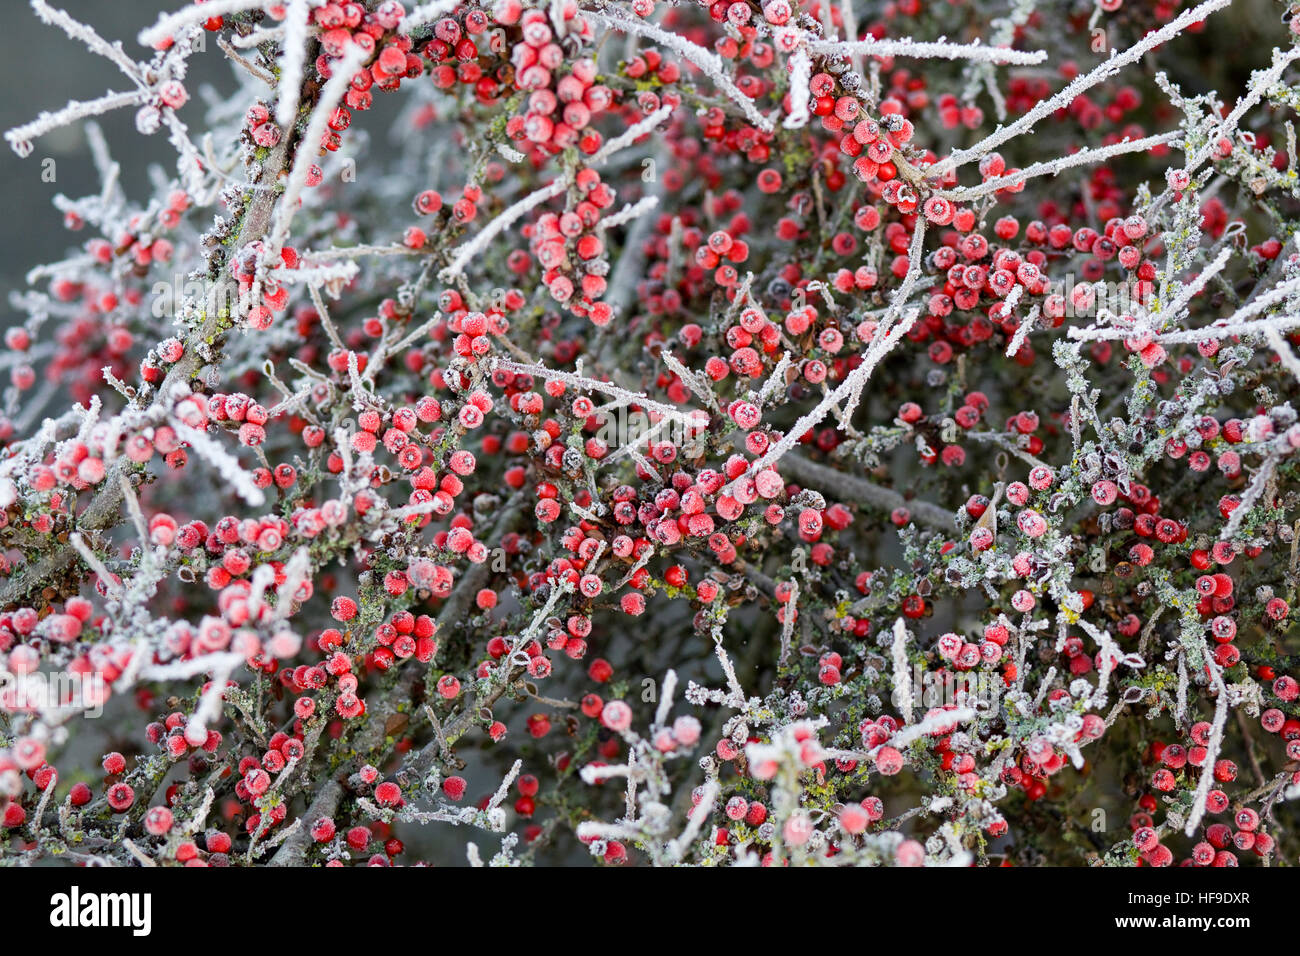 Frost covered Cotoneaster bush with red berries Stock Photo